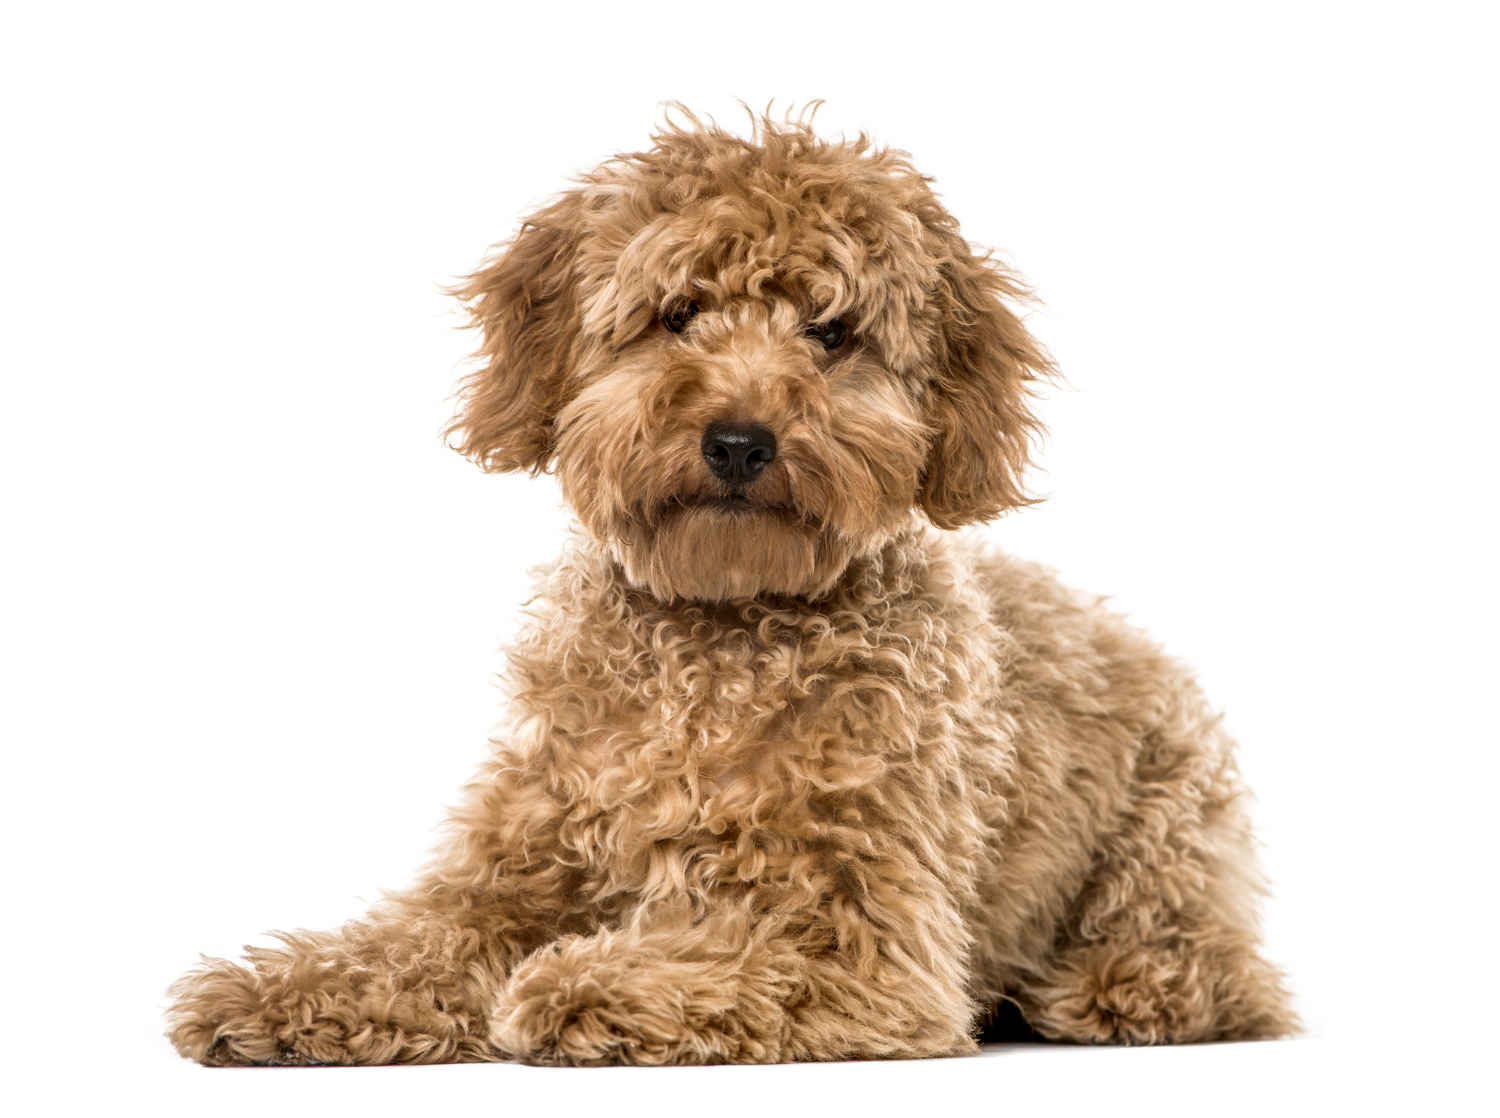 How did you handle any instances of excessive barking or vocalization from your Poodle puppy?